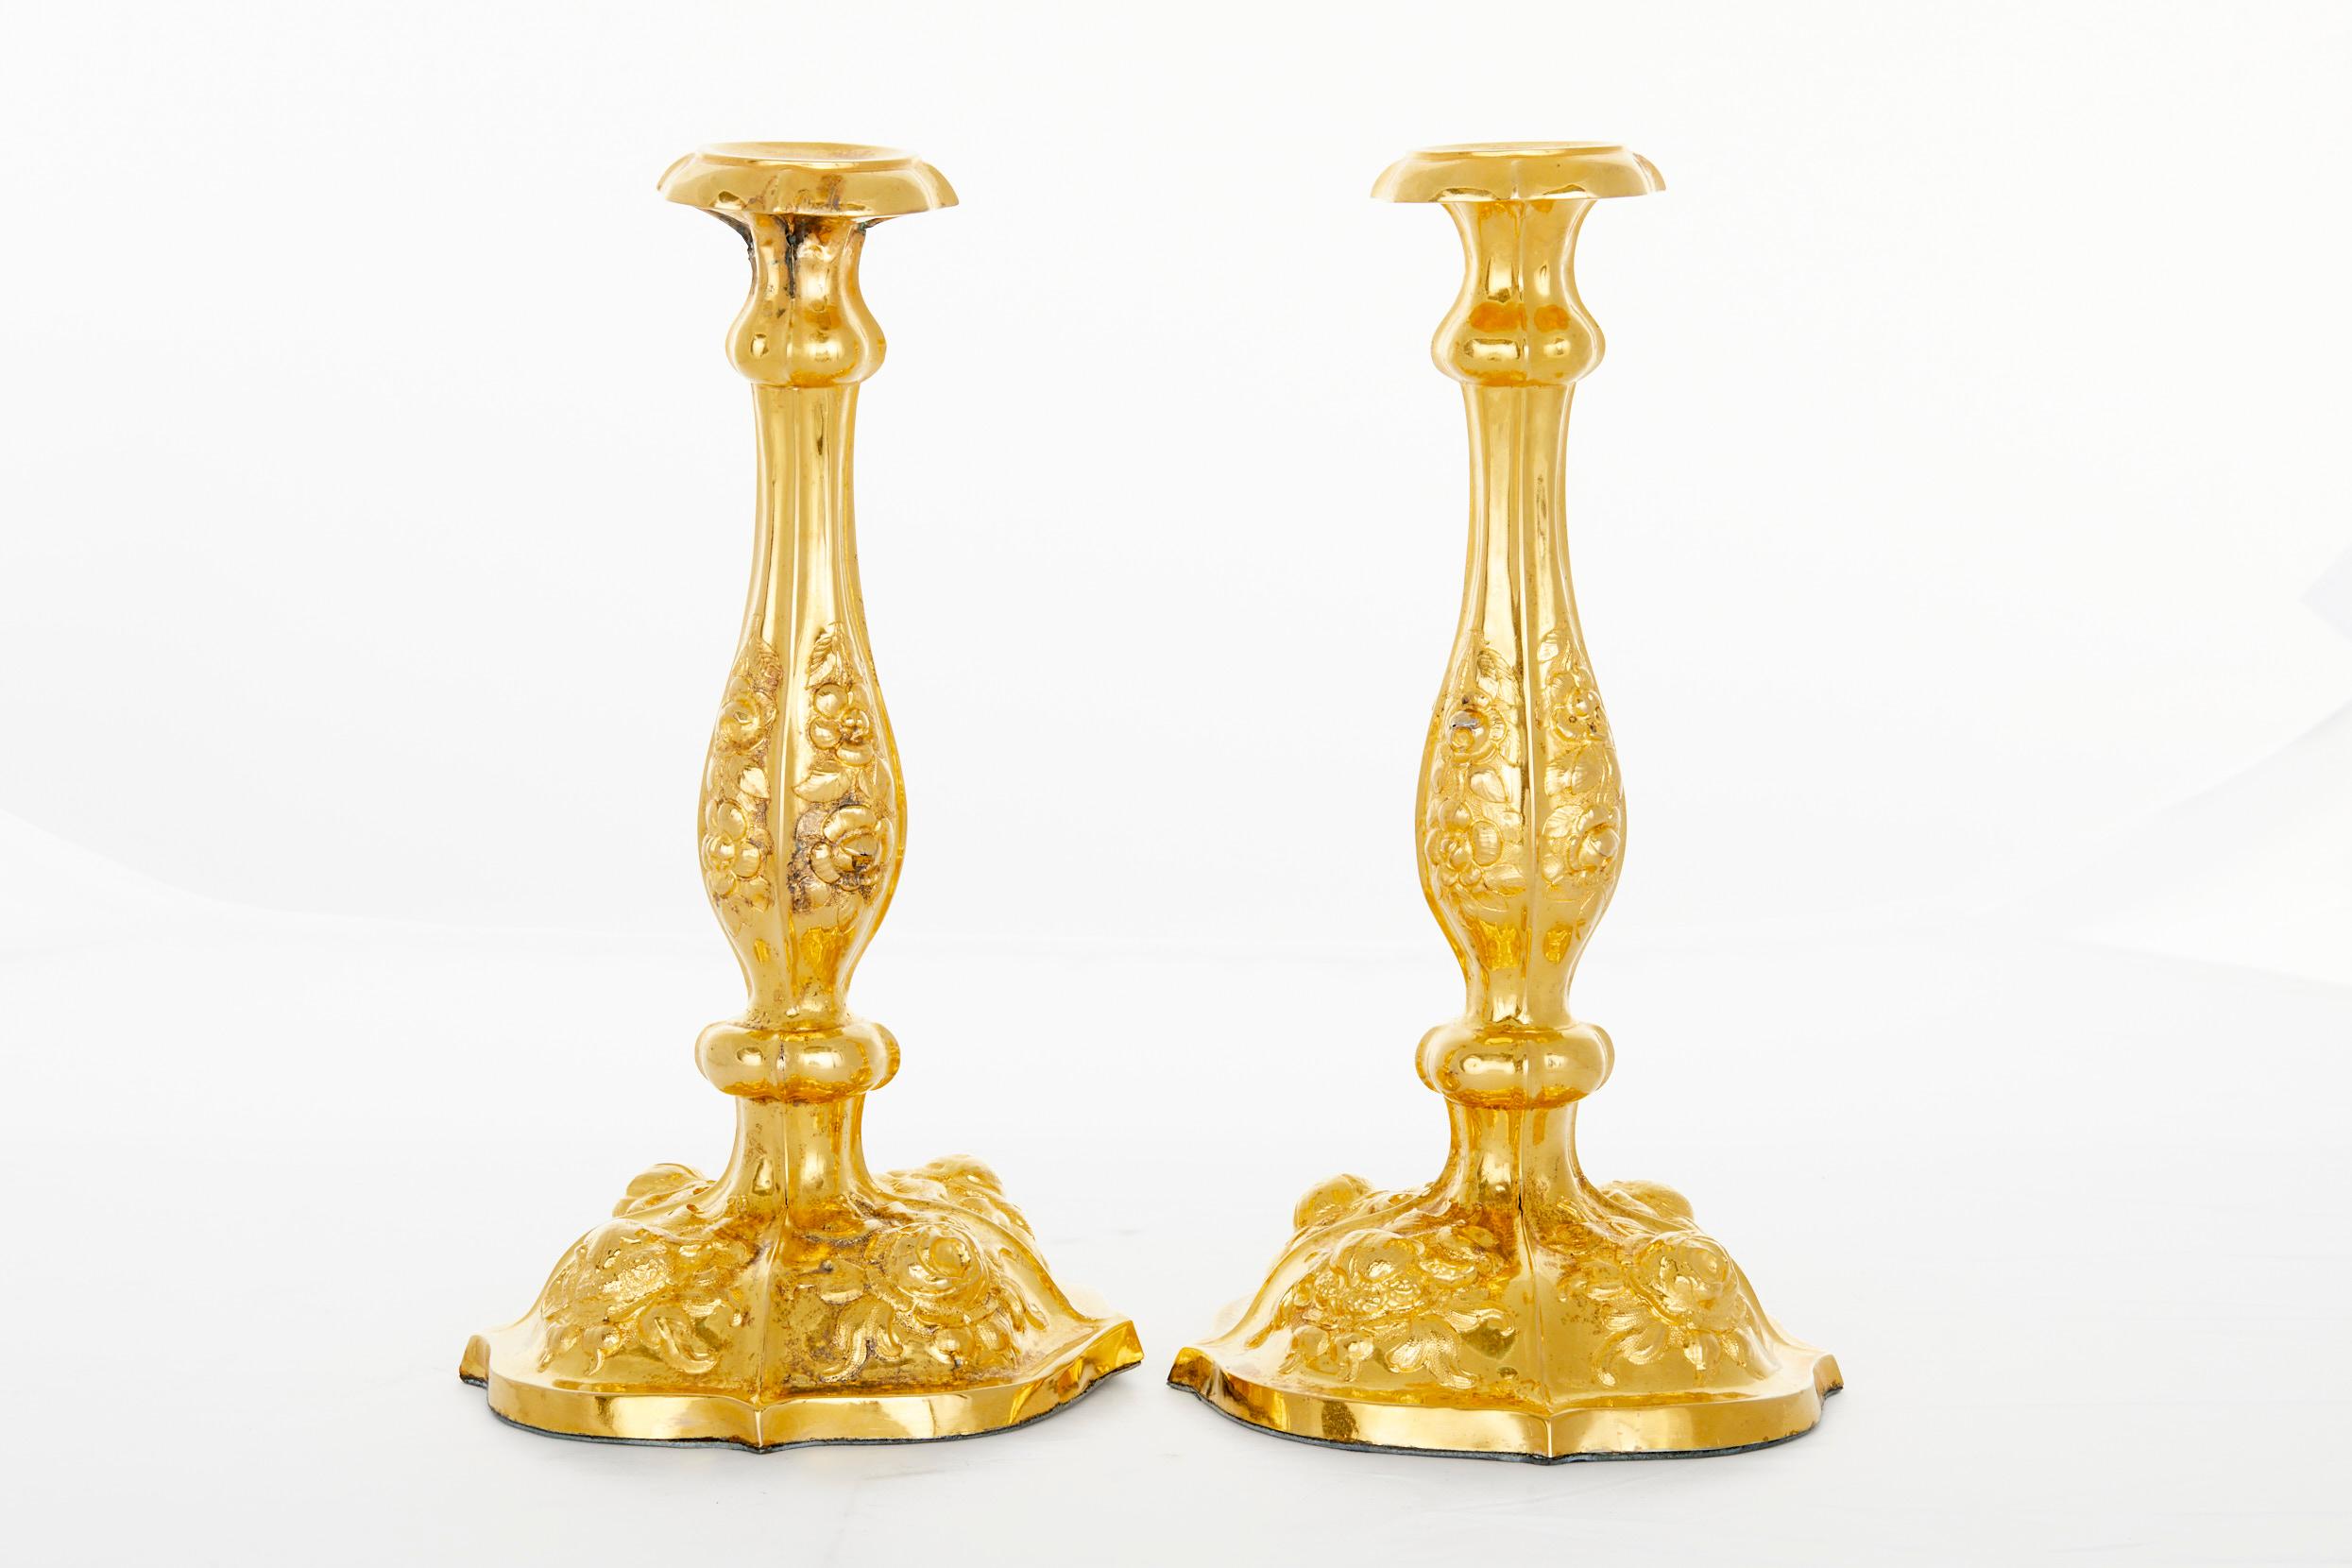 Tiffany & Co. Silver / Gilt Pair Continental Candlesticks For Sale 4